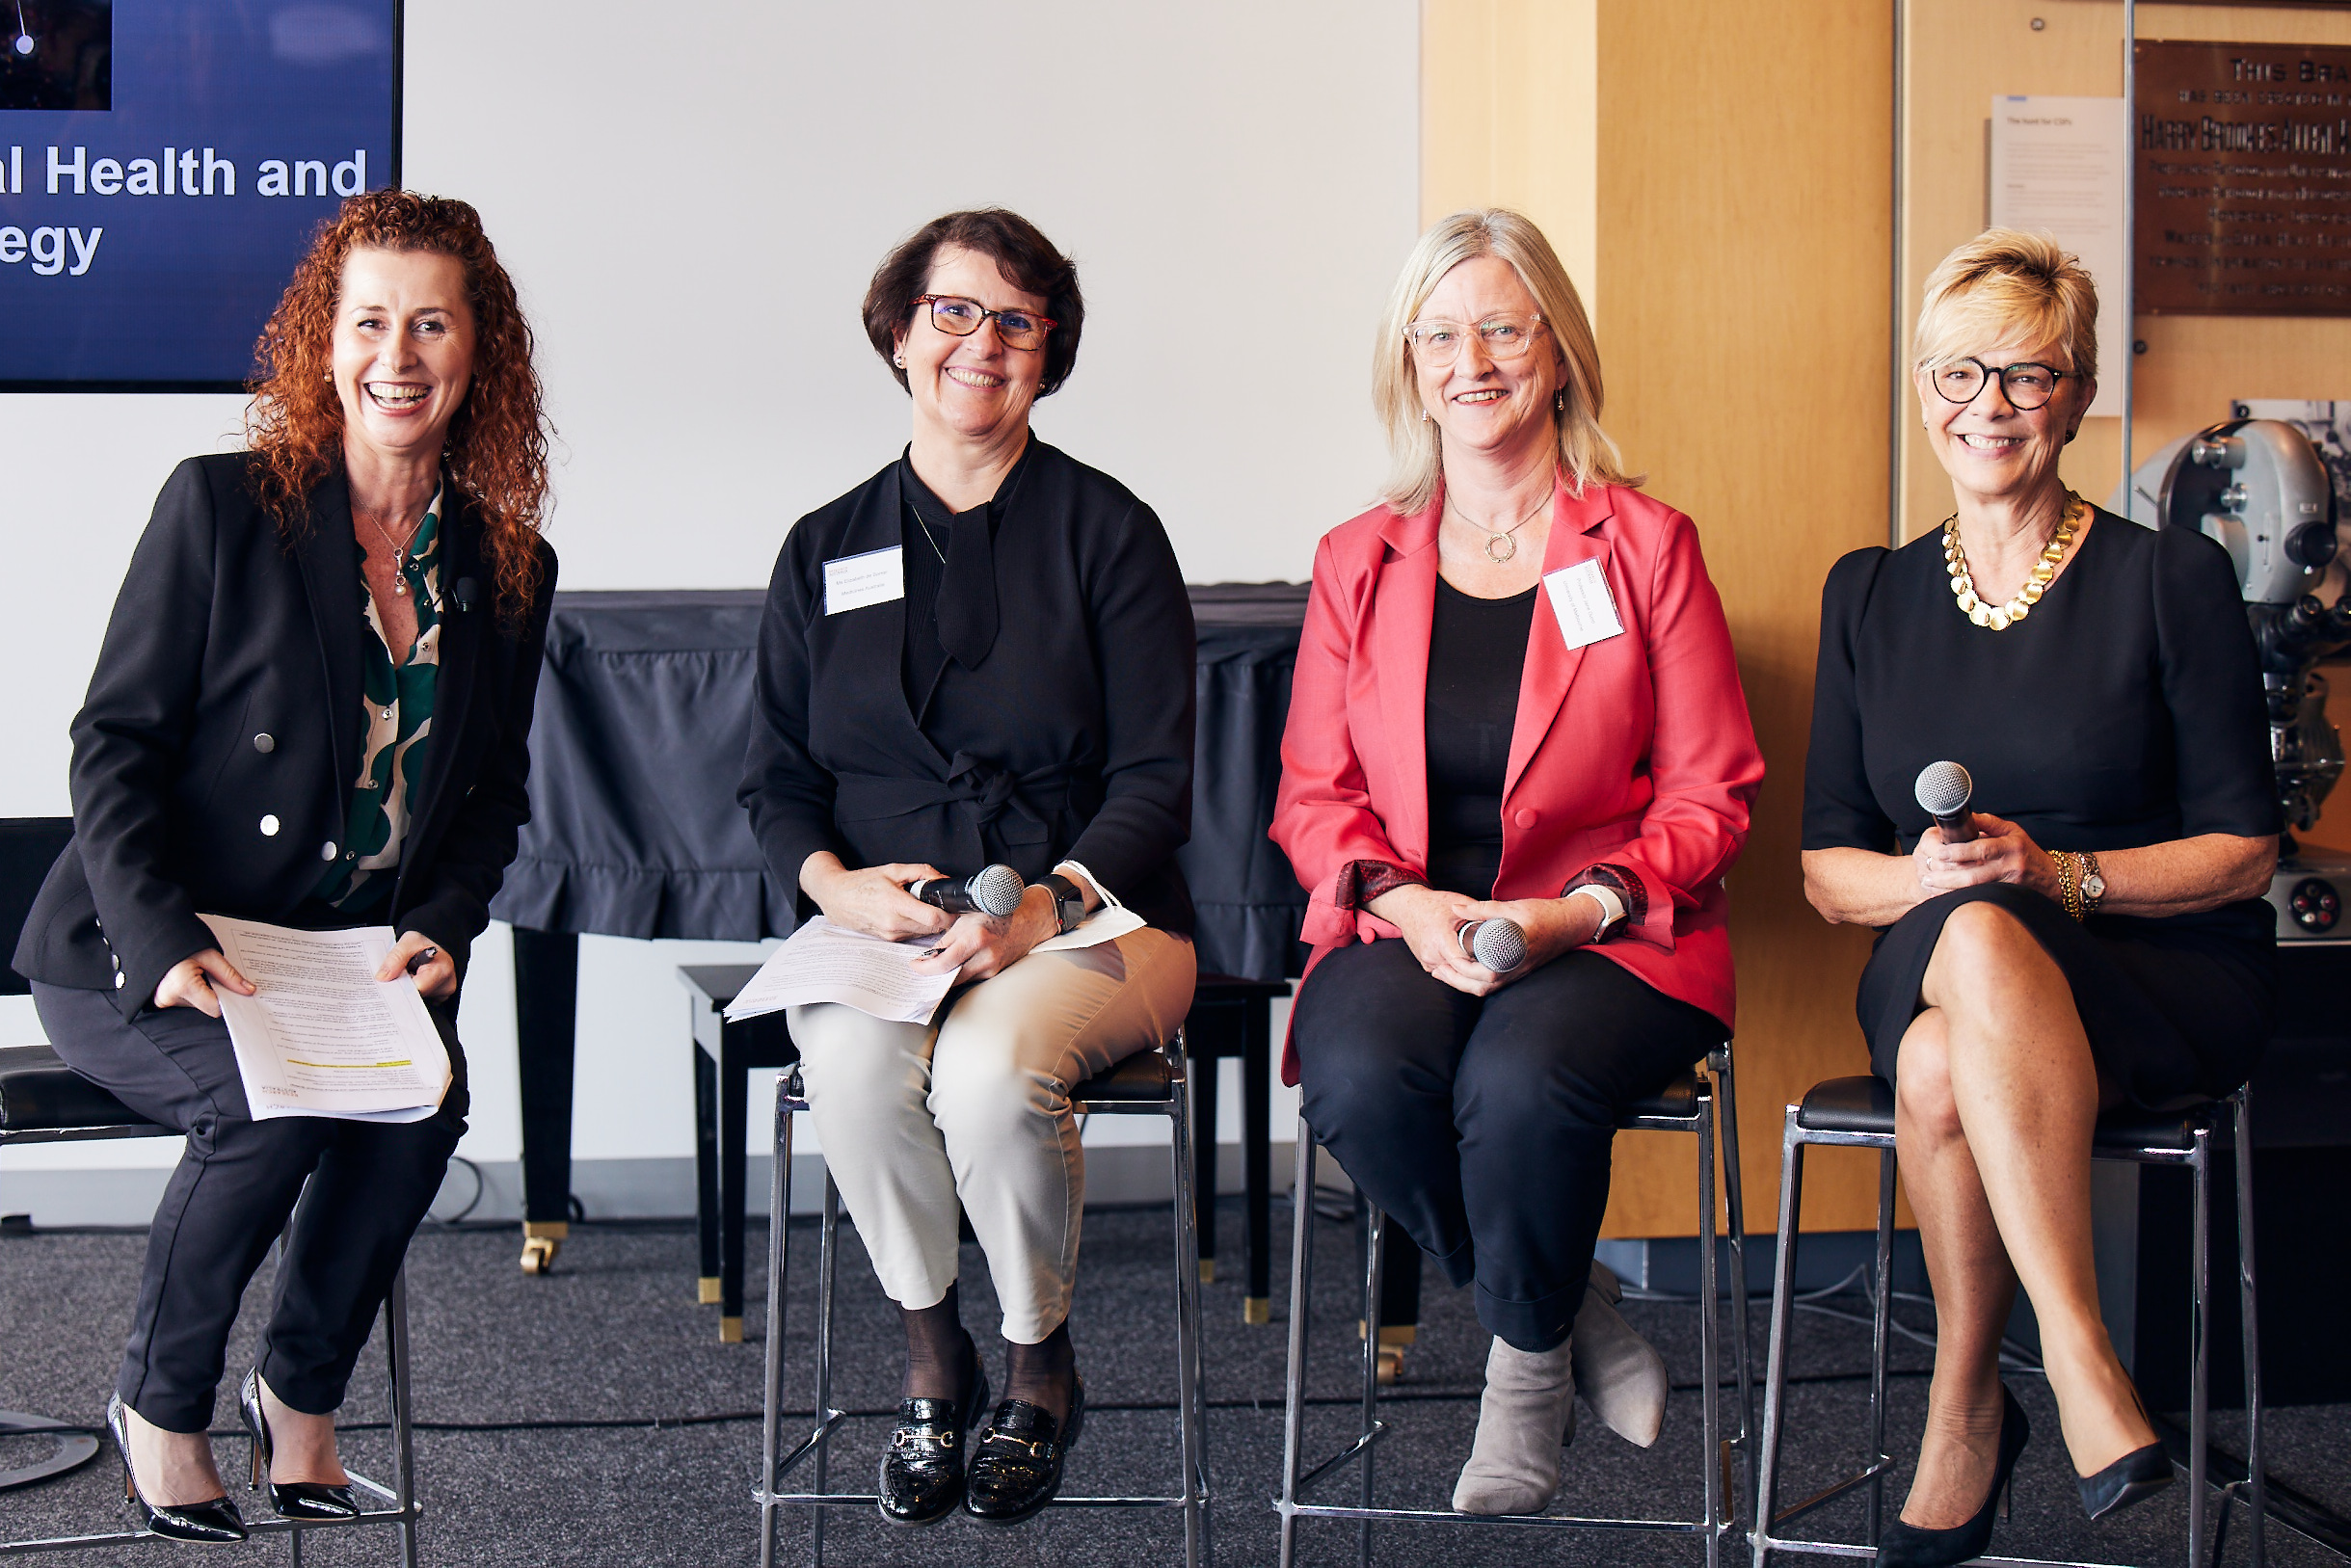 MEDIA RELEASE – MEETING OF THE MINDS ON AUSTRALIA’S FUTURE  HEALTH AND MEDICAL RESEARCH